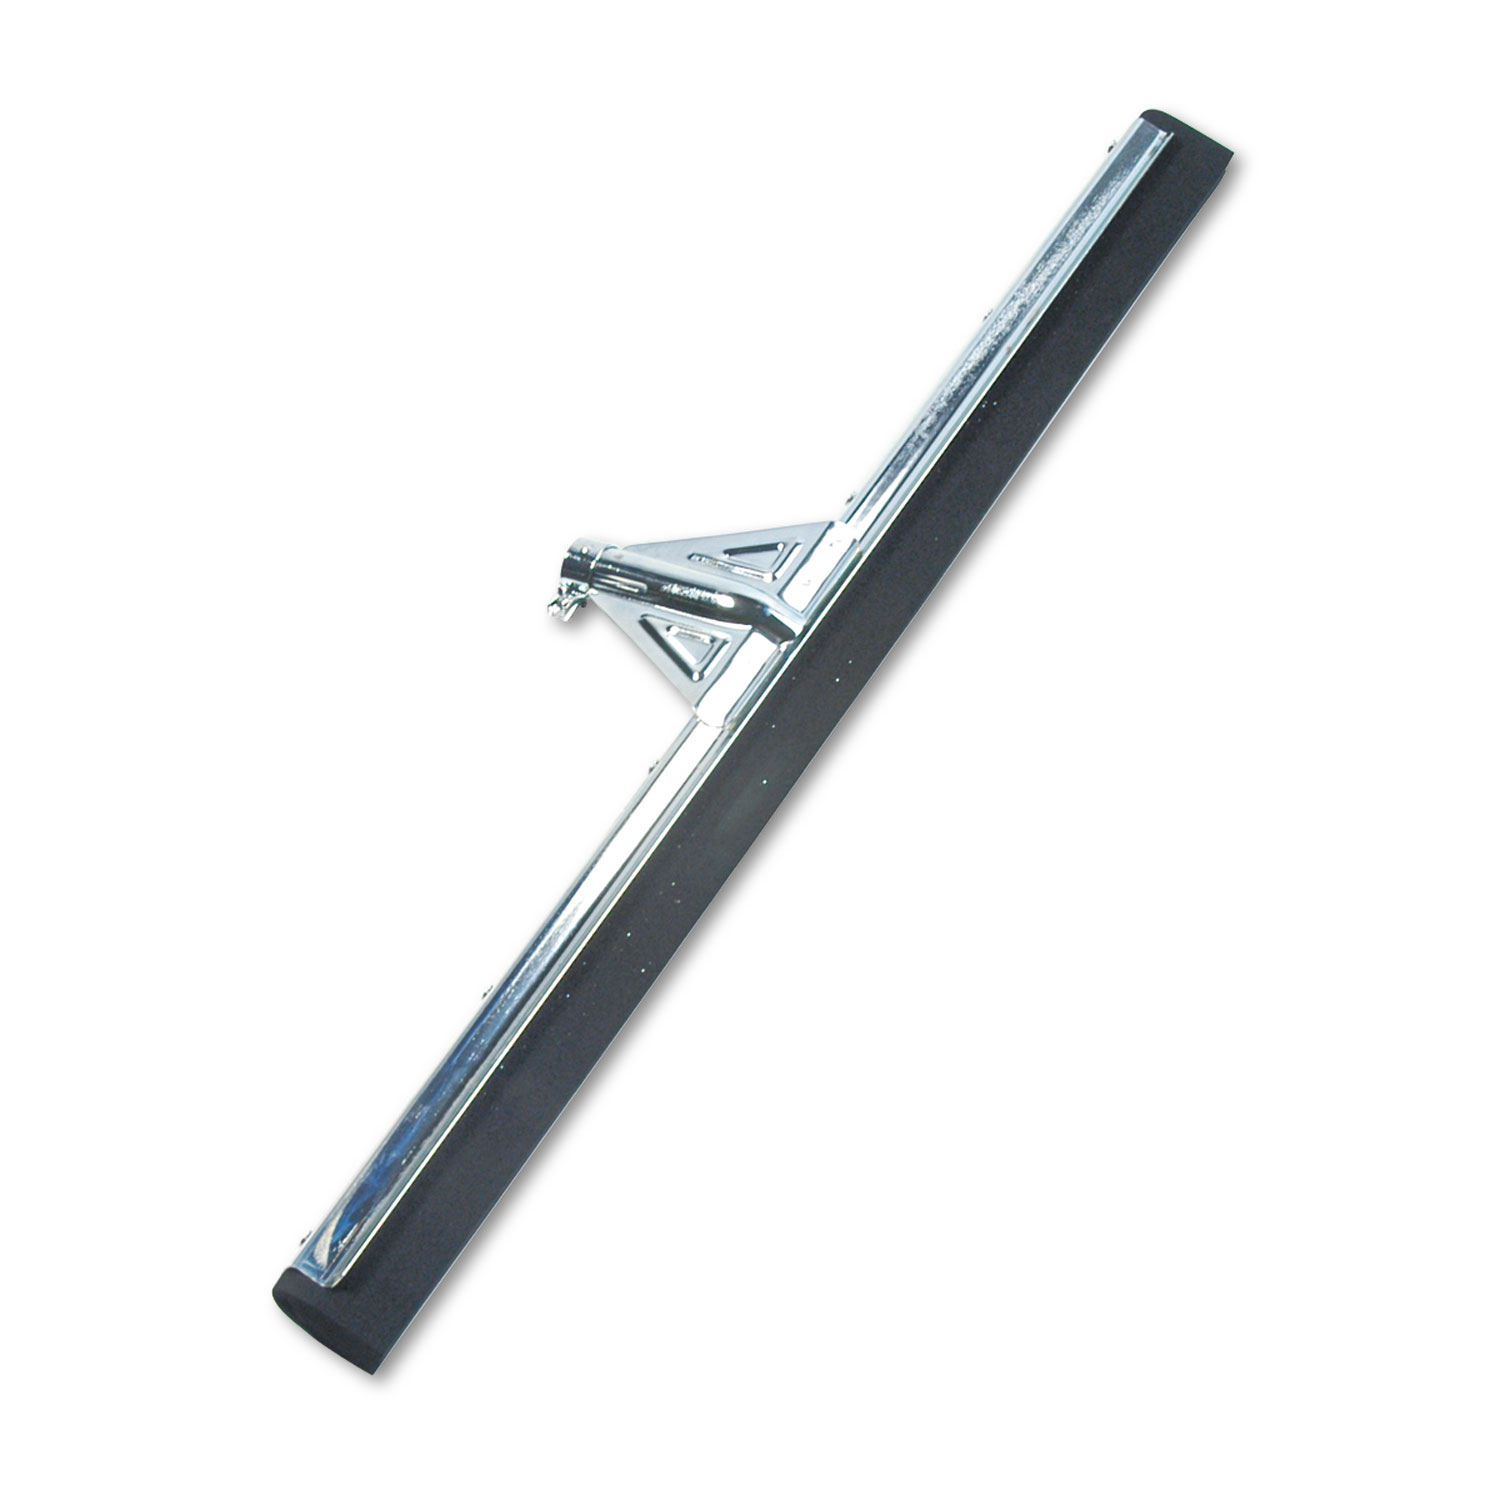  Unger HM750 Heavy-Duty Water Wand Squeegee, 30 Wide Blade (UNGHM750) 